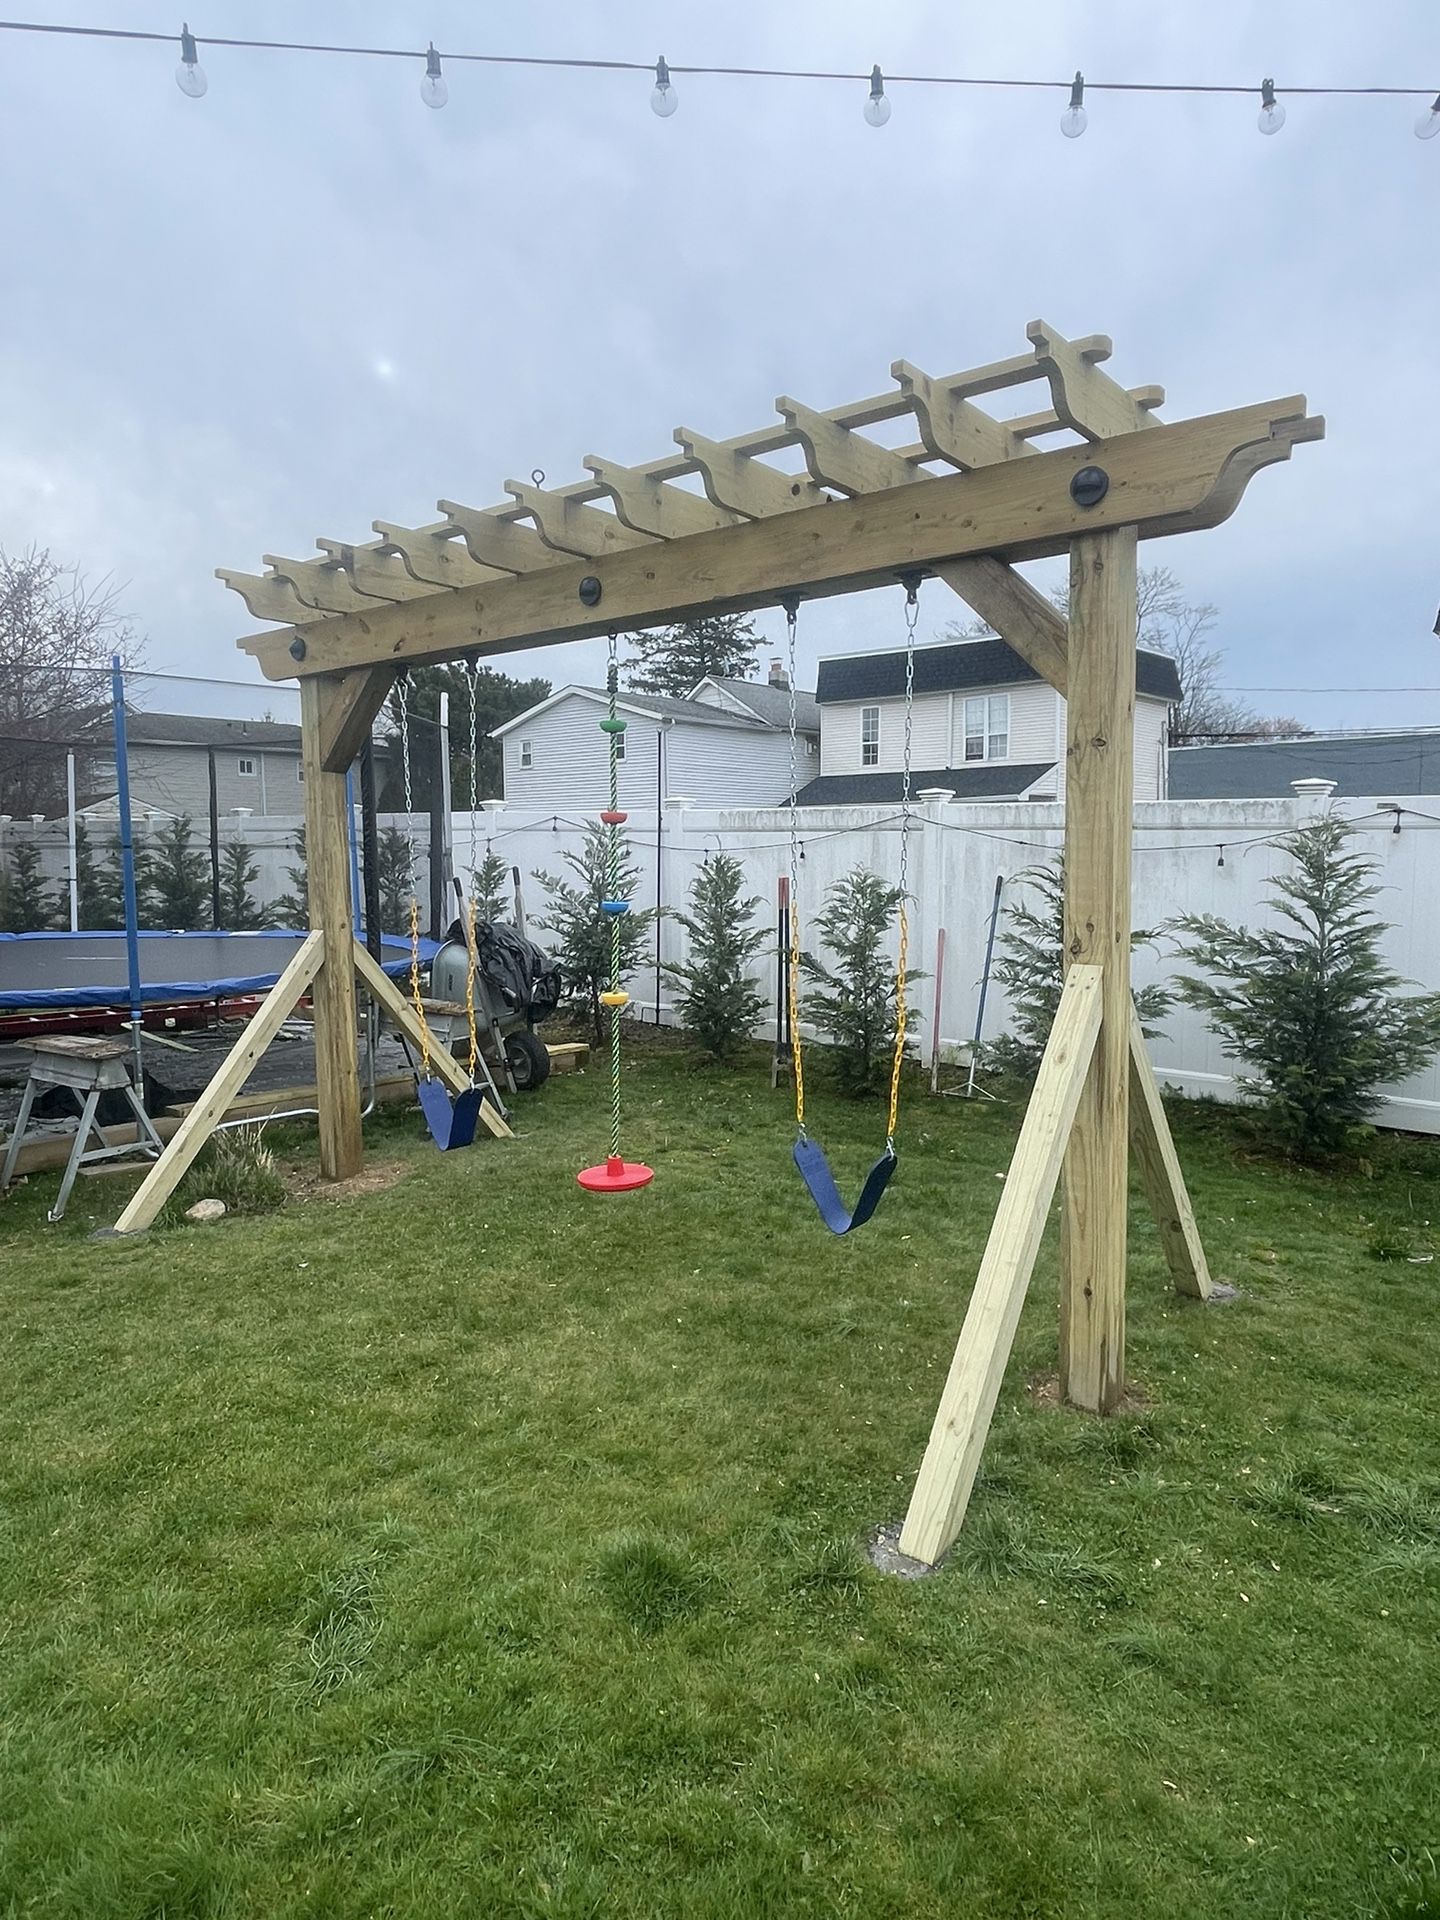 swing set for kids really strong 